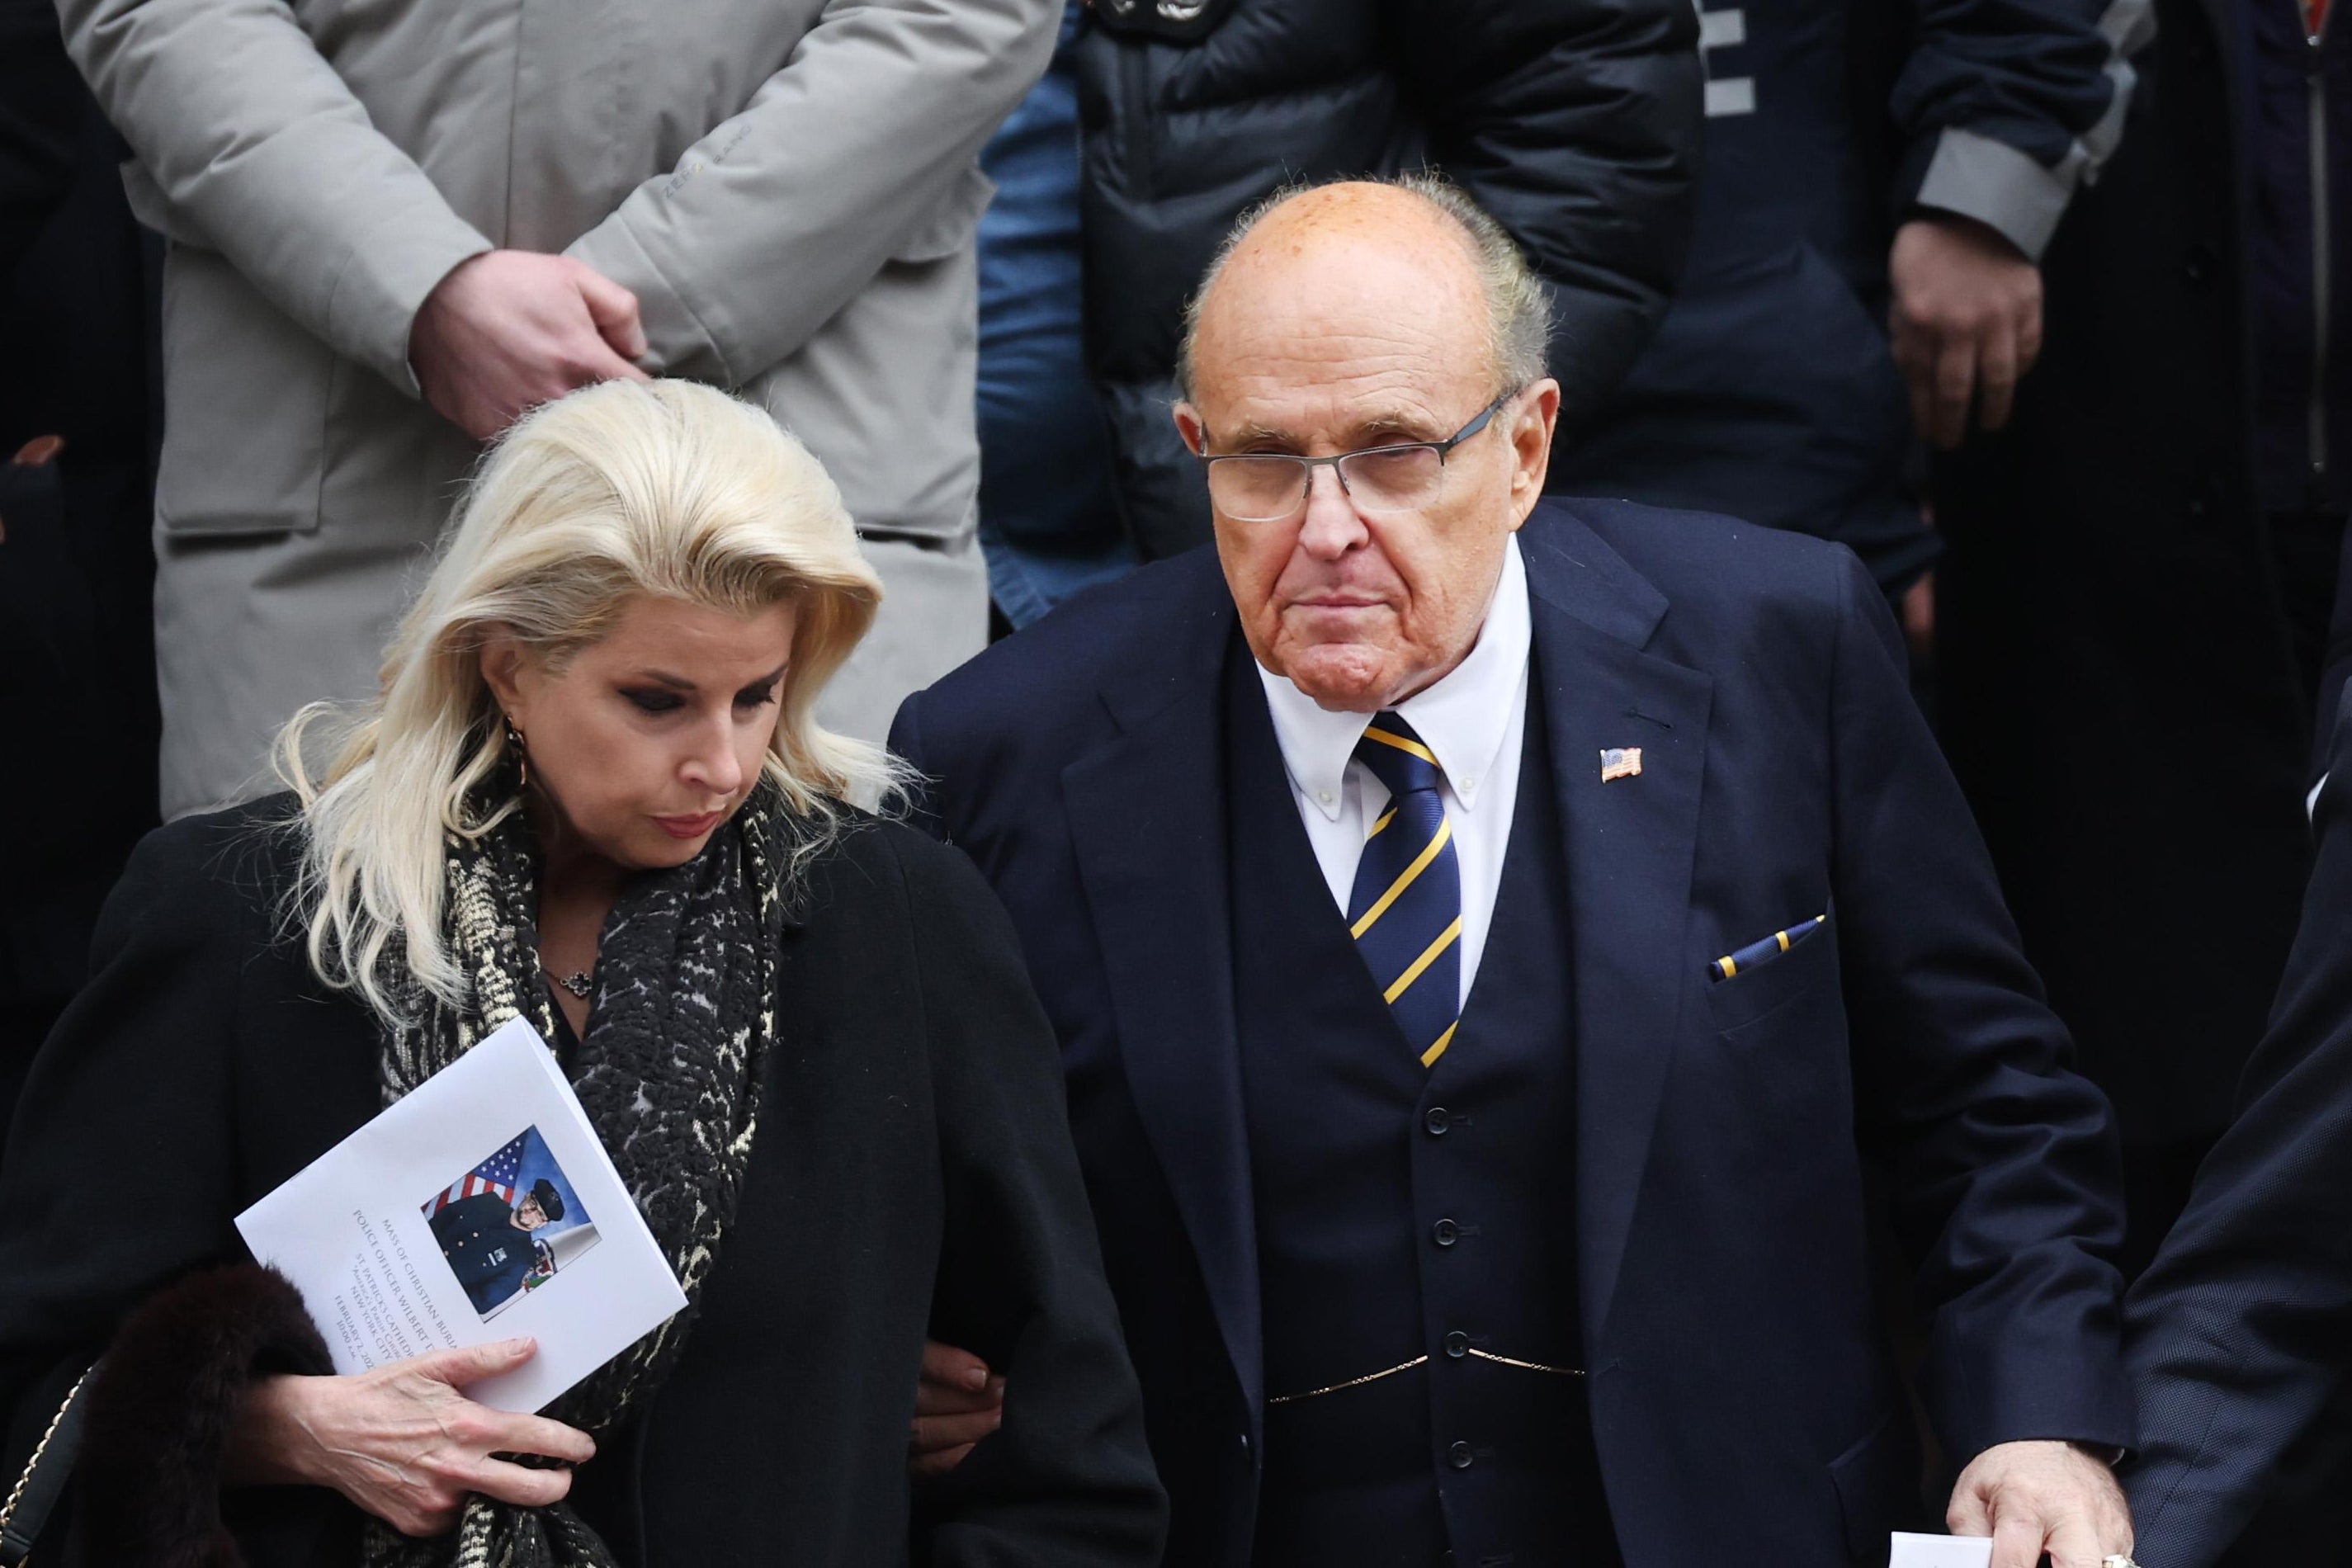 Former New York City Mayor Rudy Giuliani leaves the funeral for fallen NYPD officer Wilbert Mora at St. Patrick's Cathedral on February 2, 2022 in New York City.